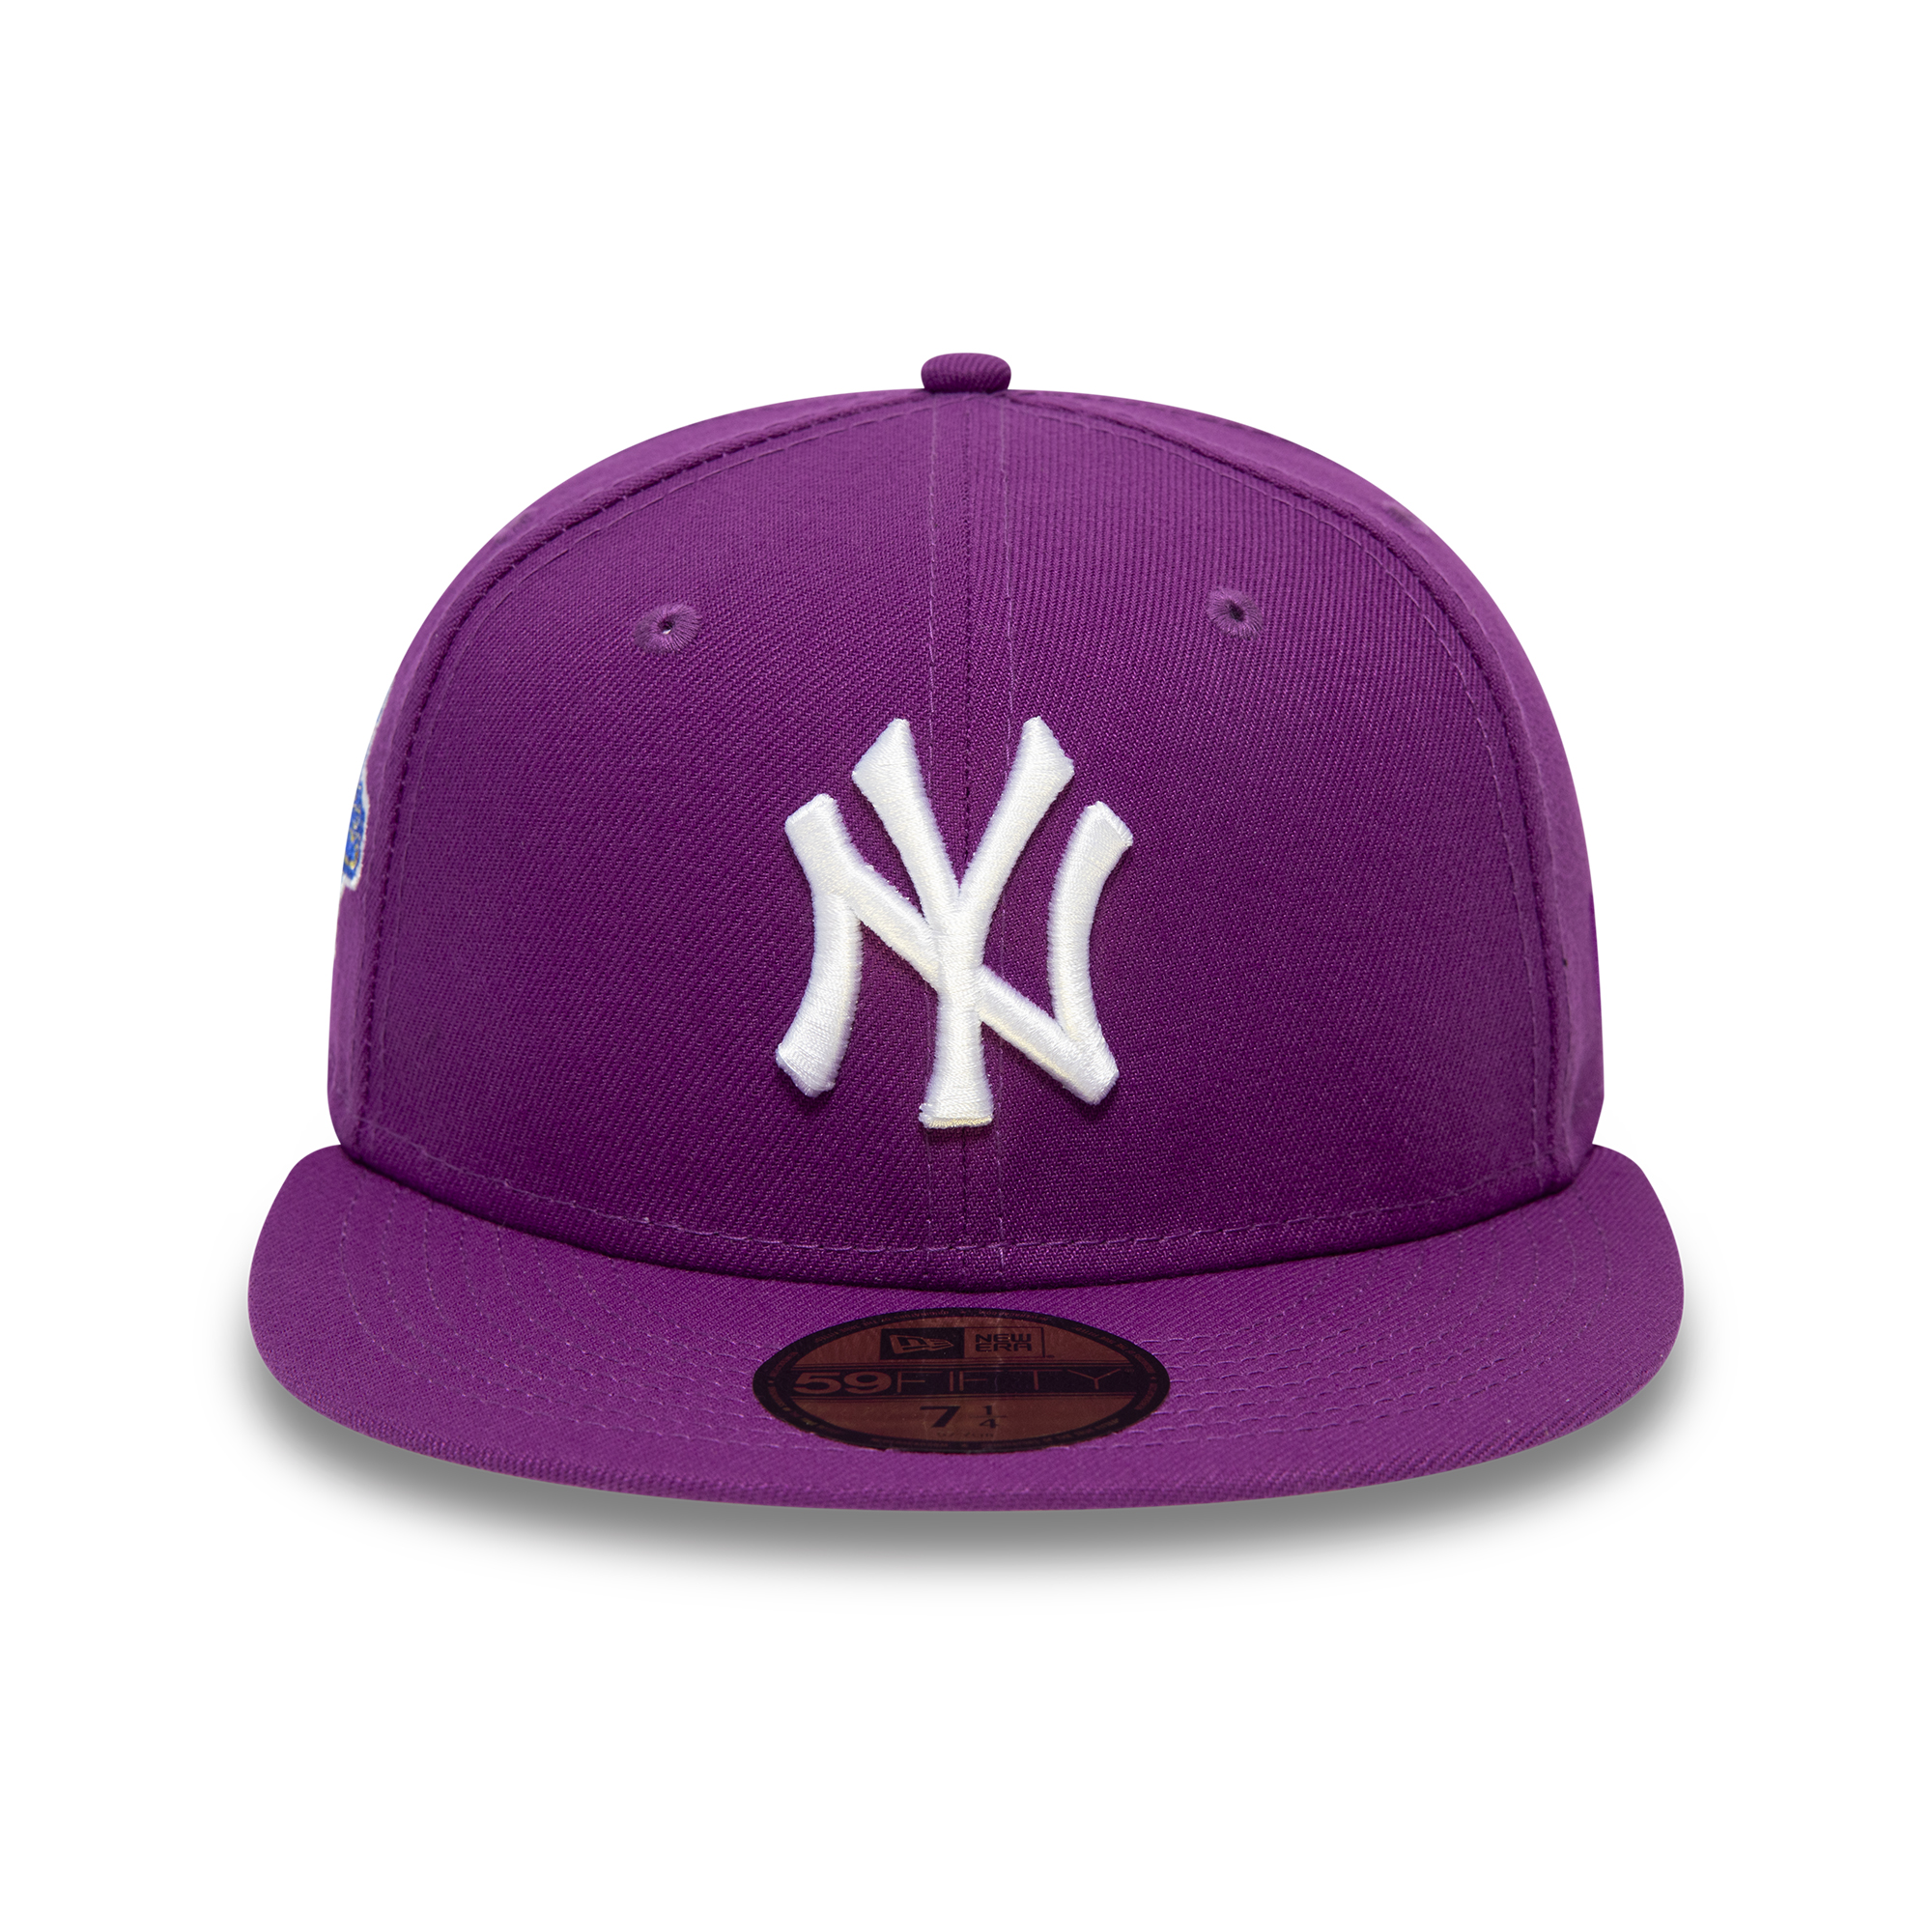 Gorra oficial New Era New York Yankees MLB Grape 59FIFTY Fitted